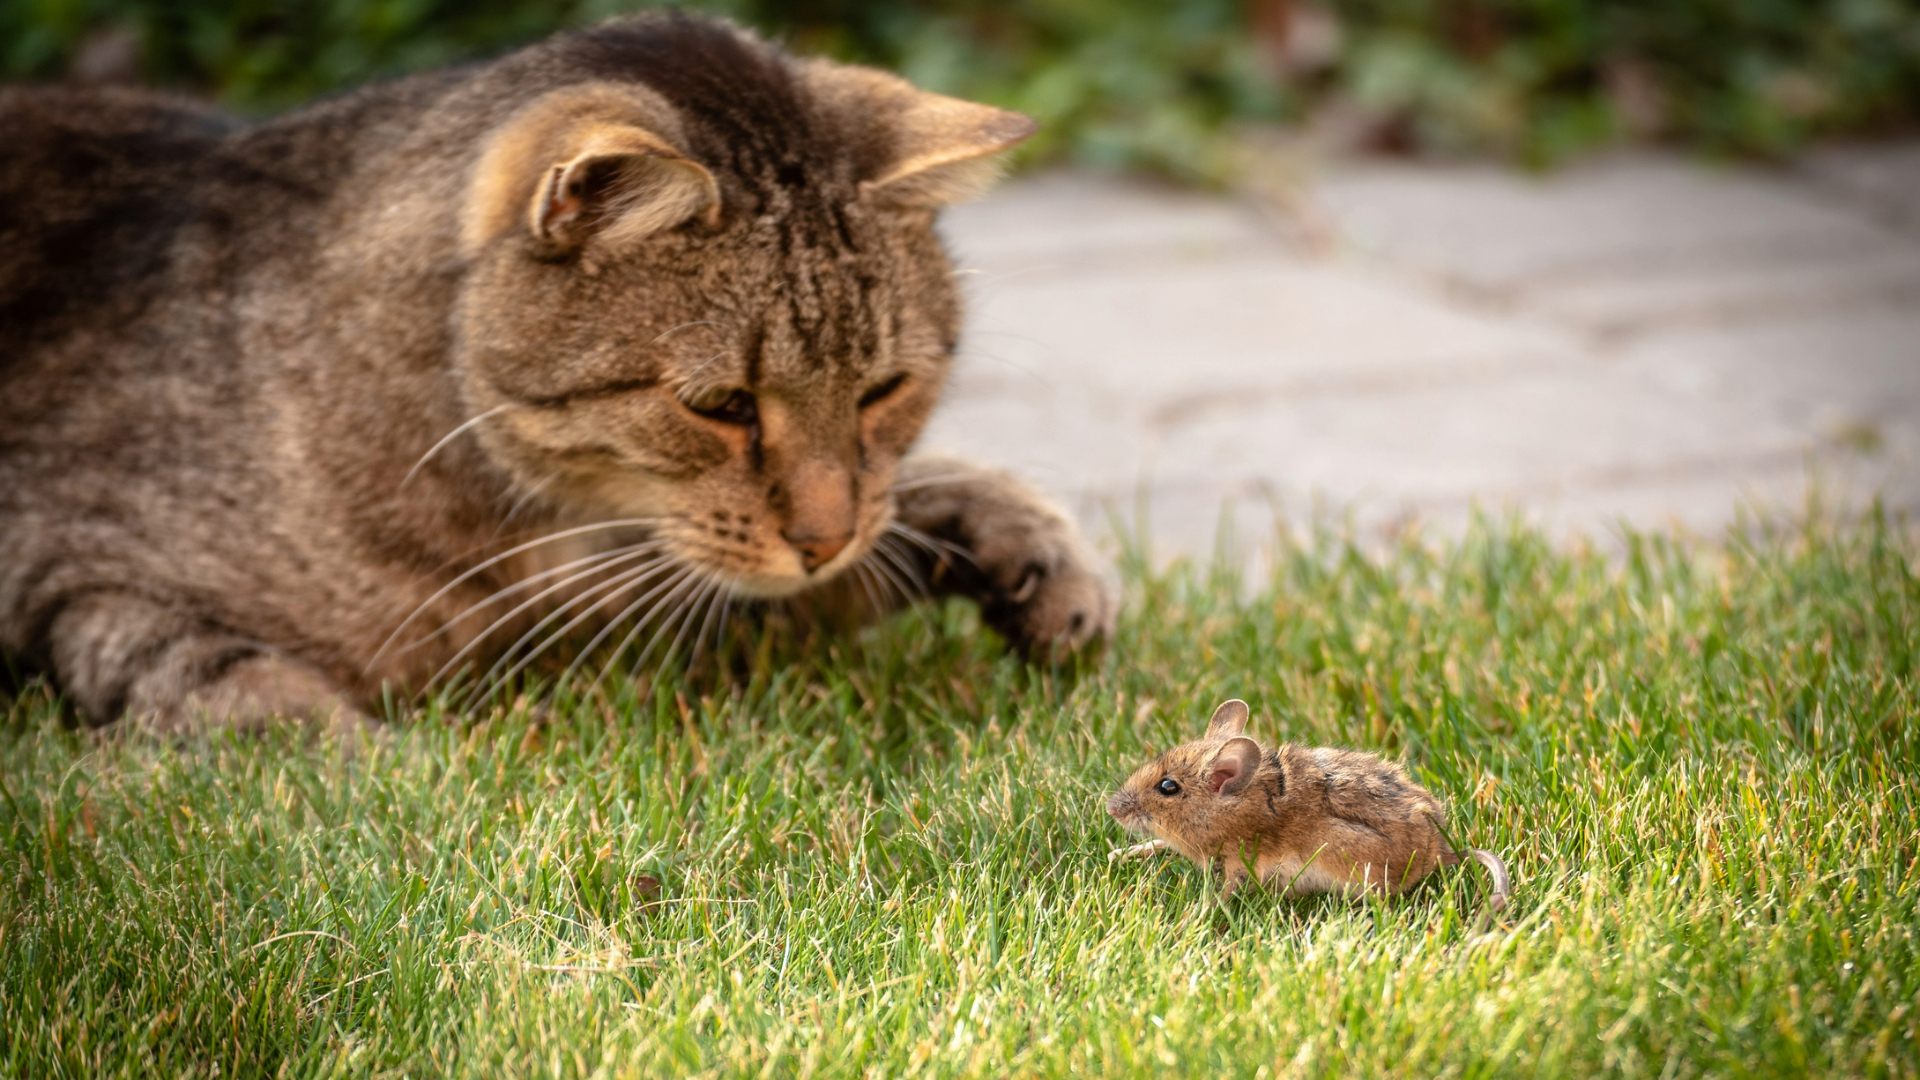 Cat looking at a mouse on the grass